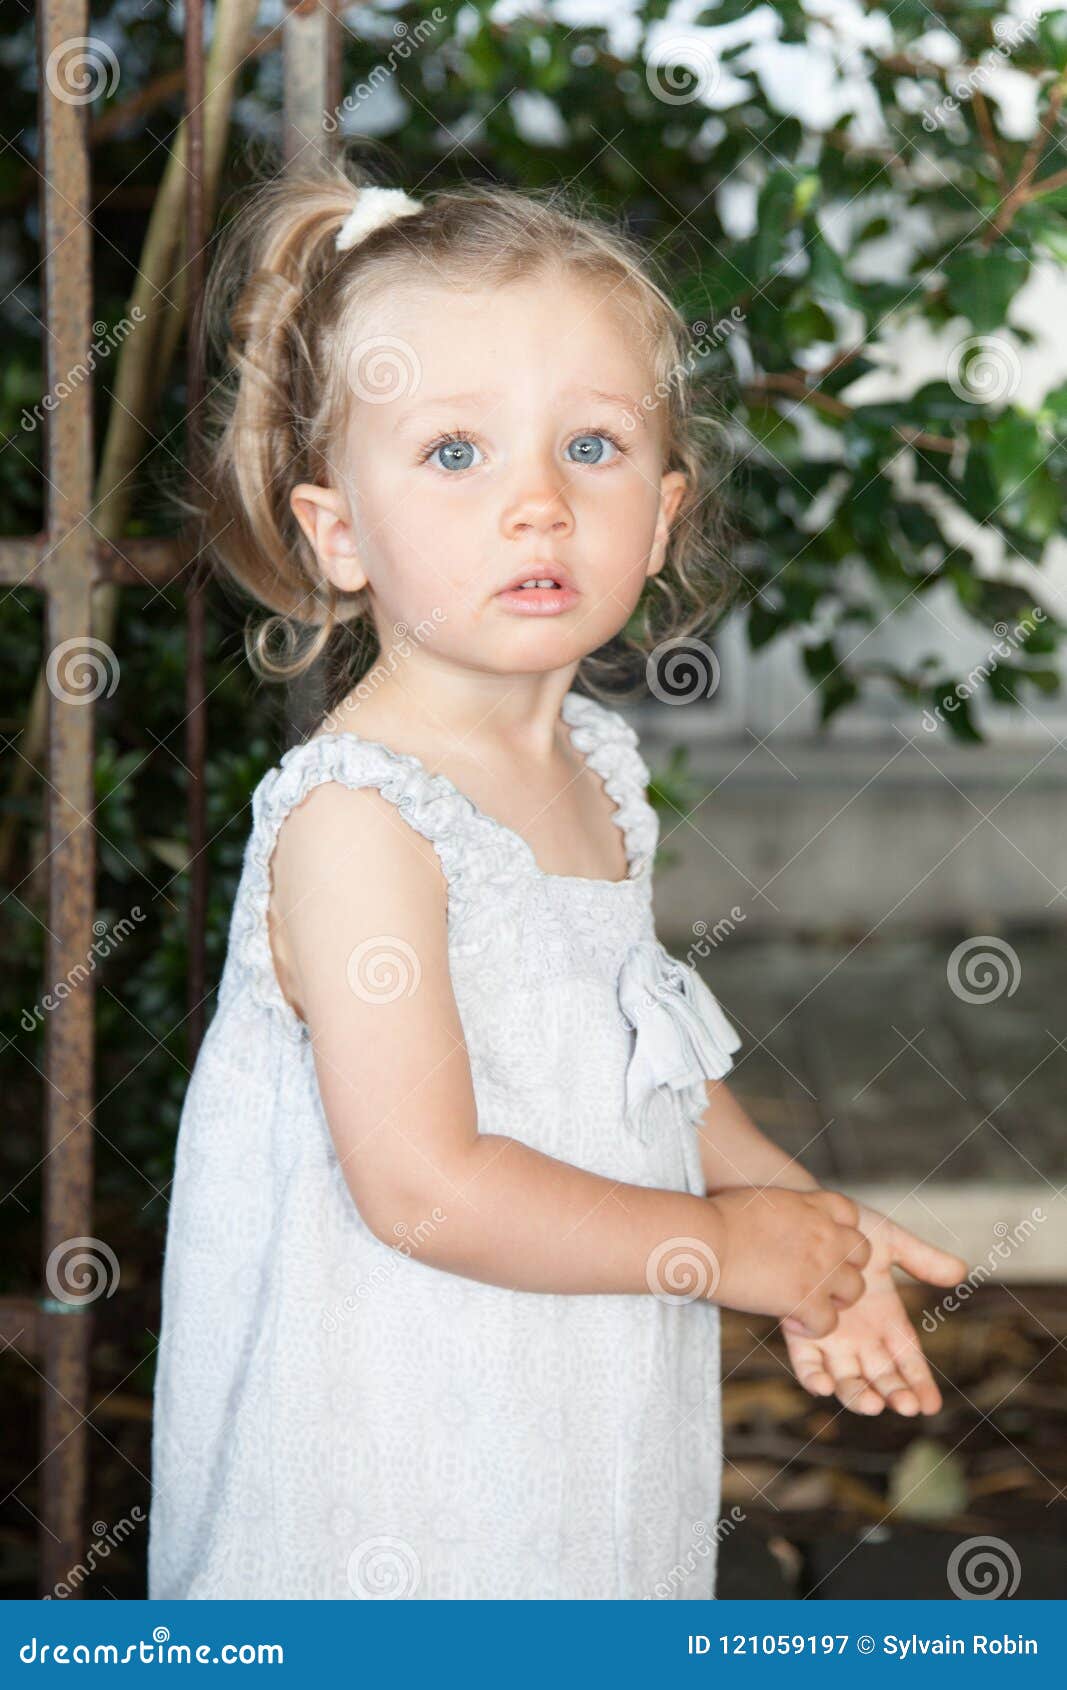 Child Girl Blonde With Perfect Blue Eyes Stock Image Image Of